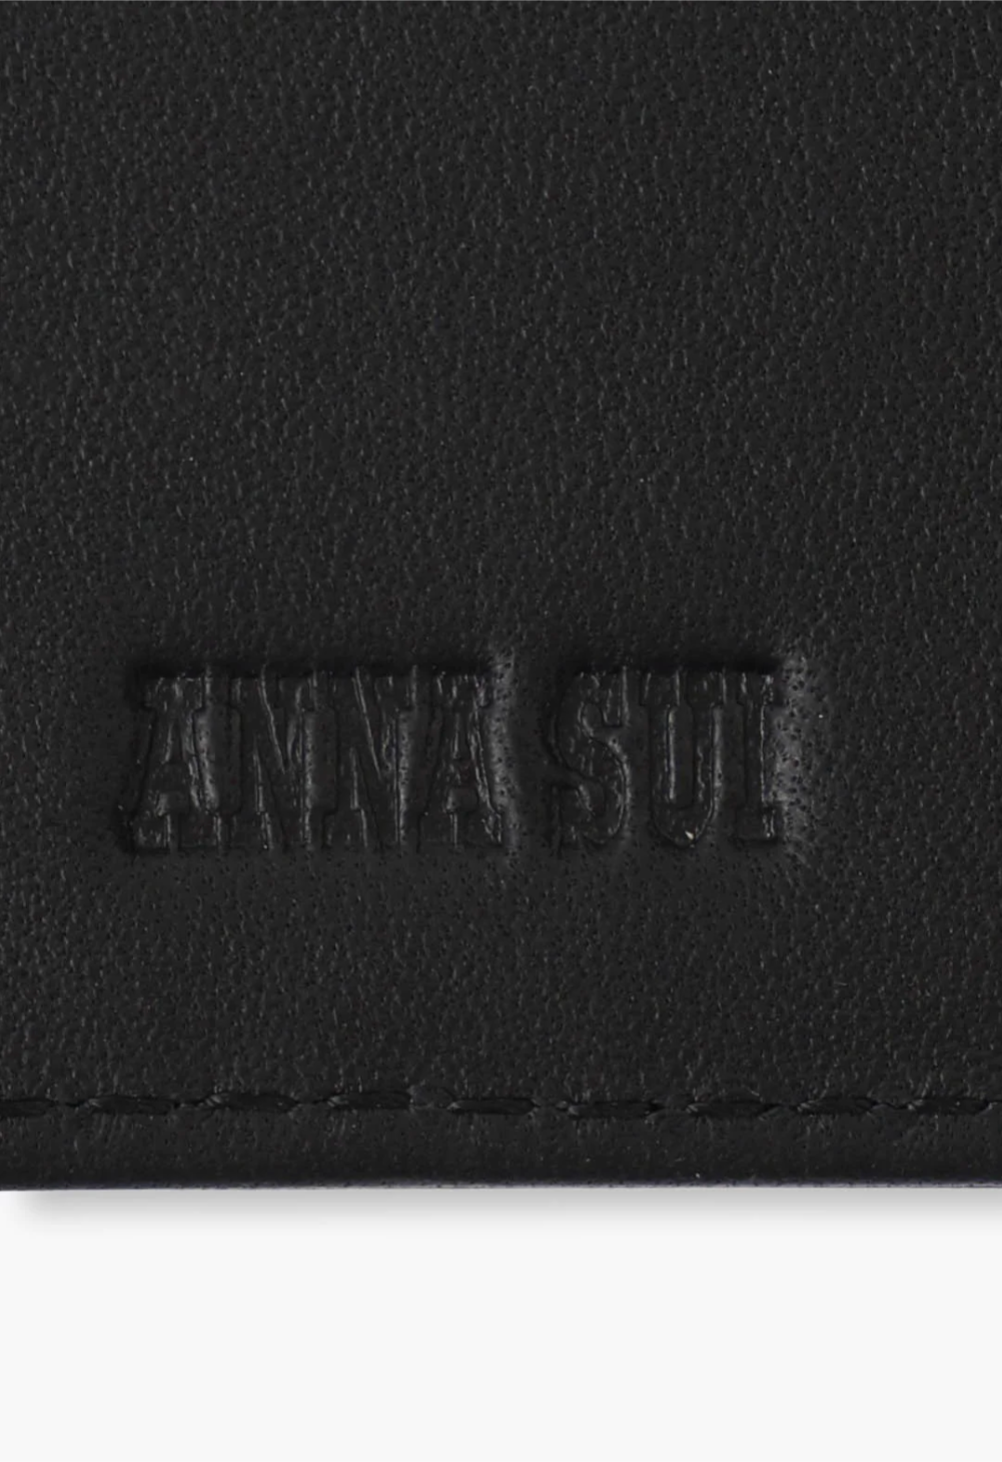 The Roger Wallet in black, detail of the Anna Sui Raised logo and large black stiches